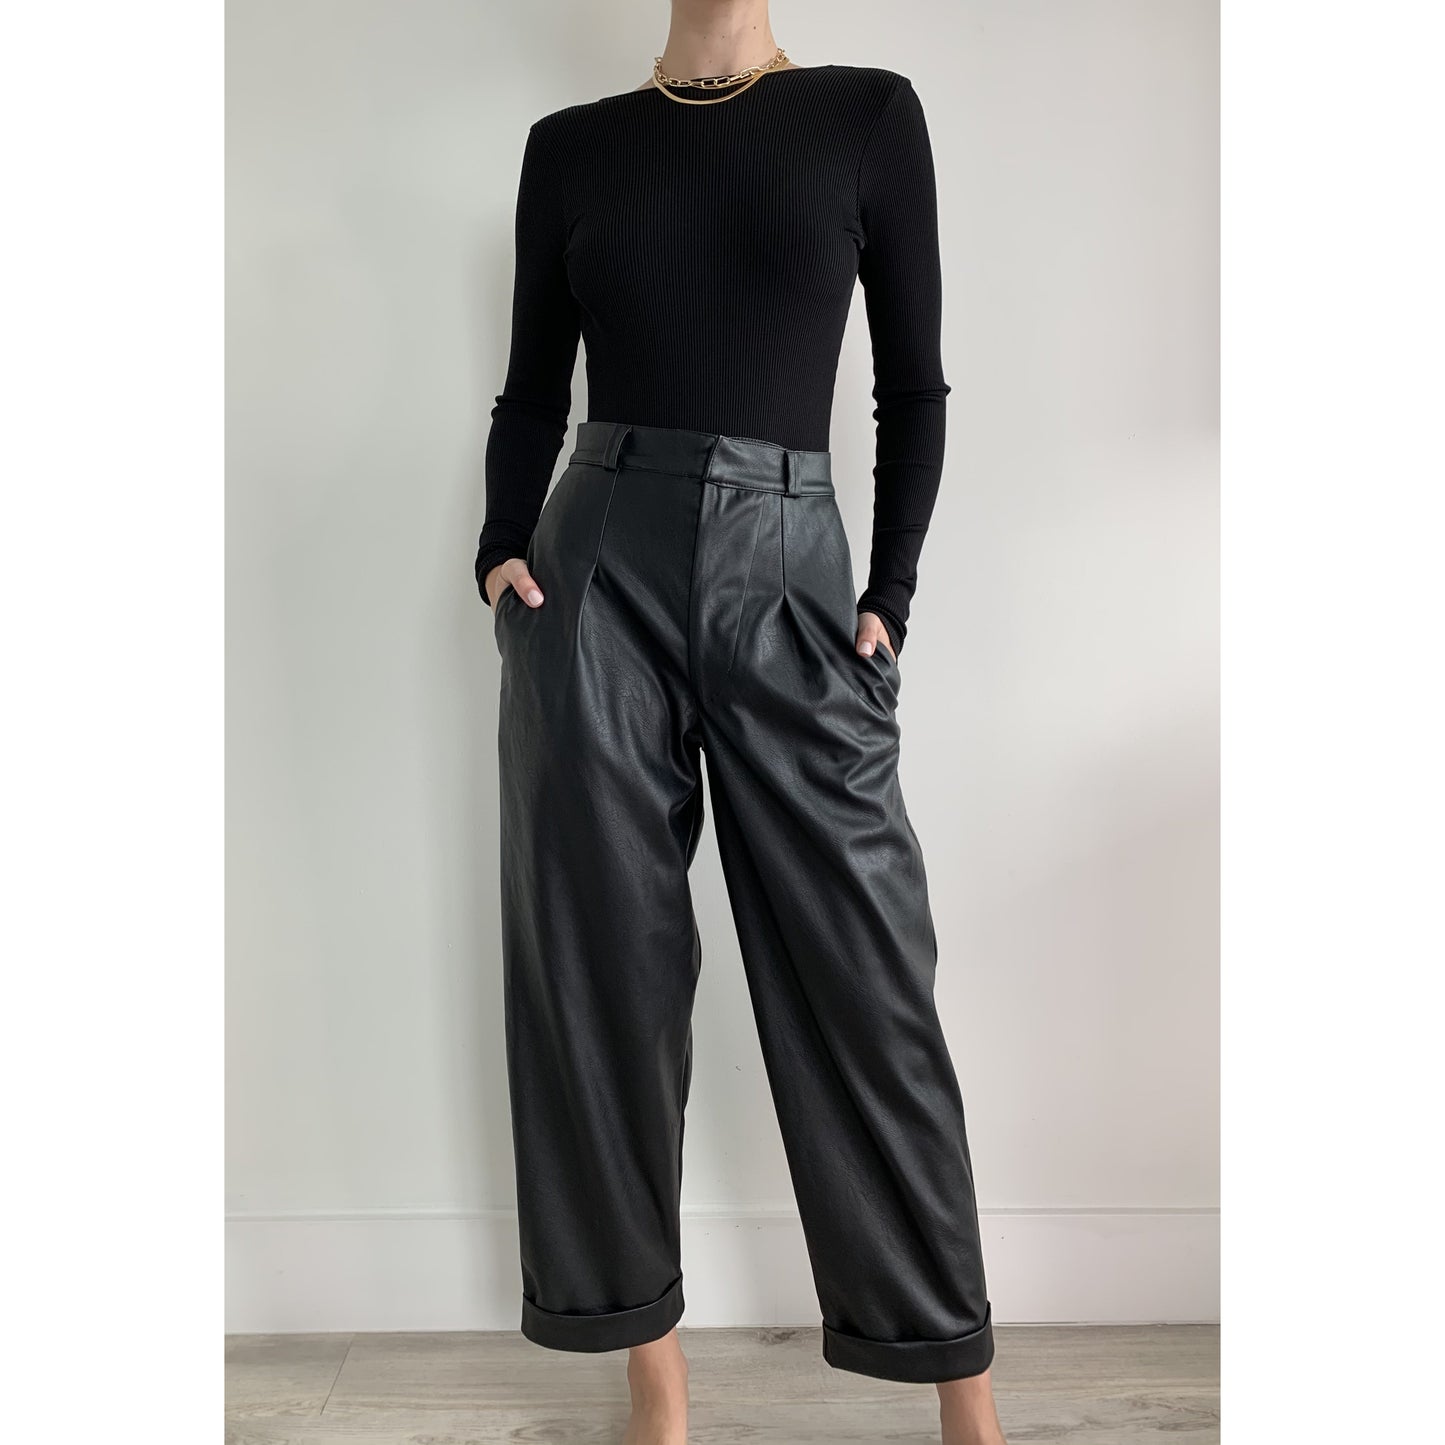 Avery Pant | Women’s Clothing Boutique